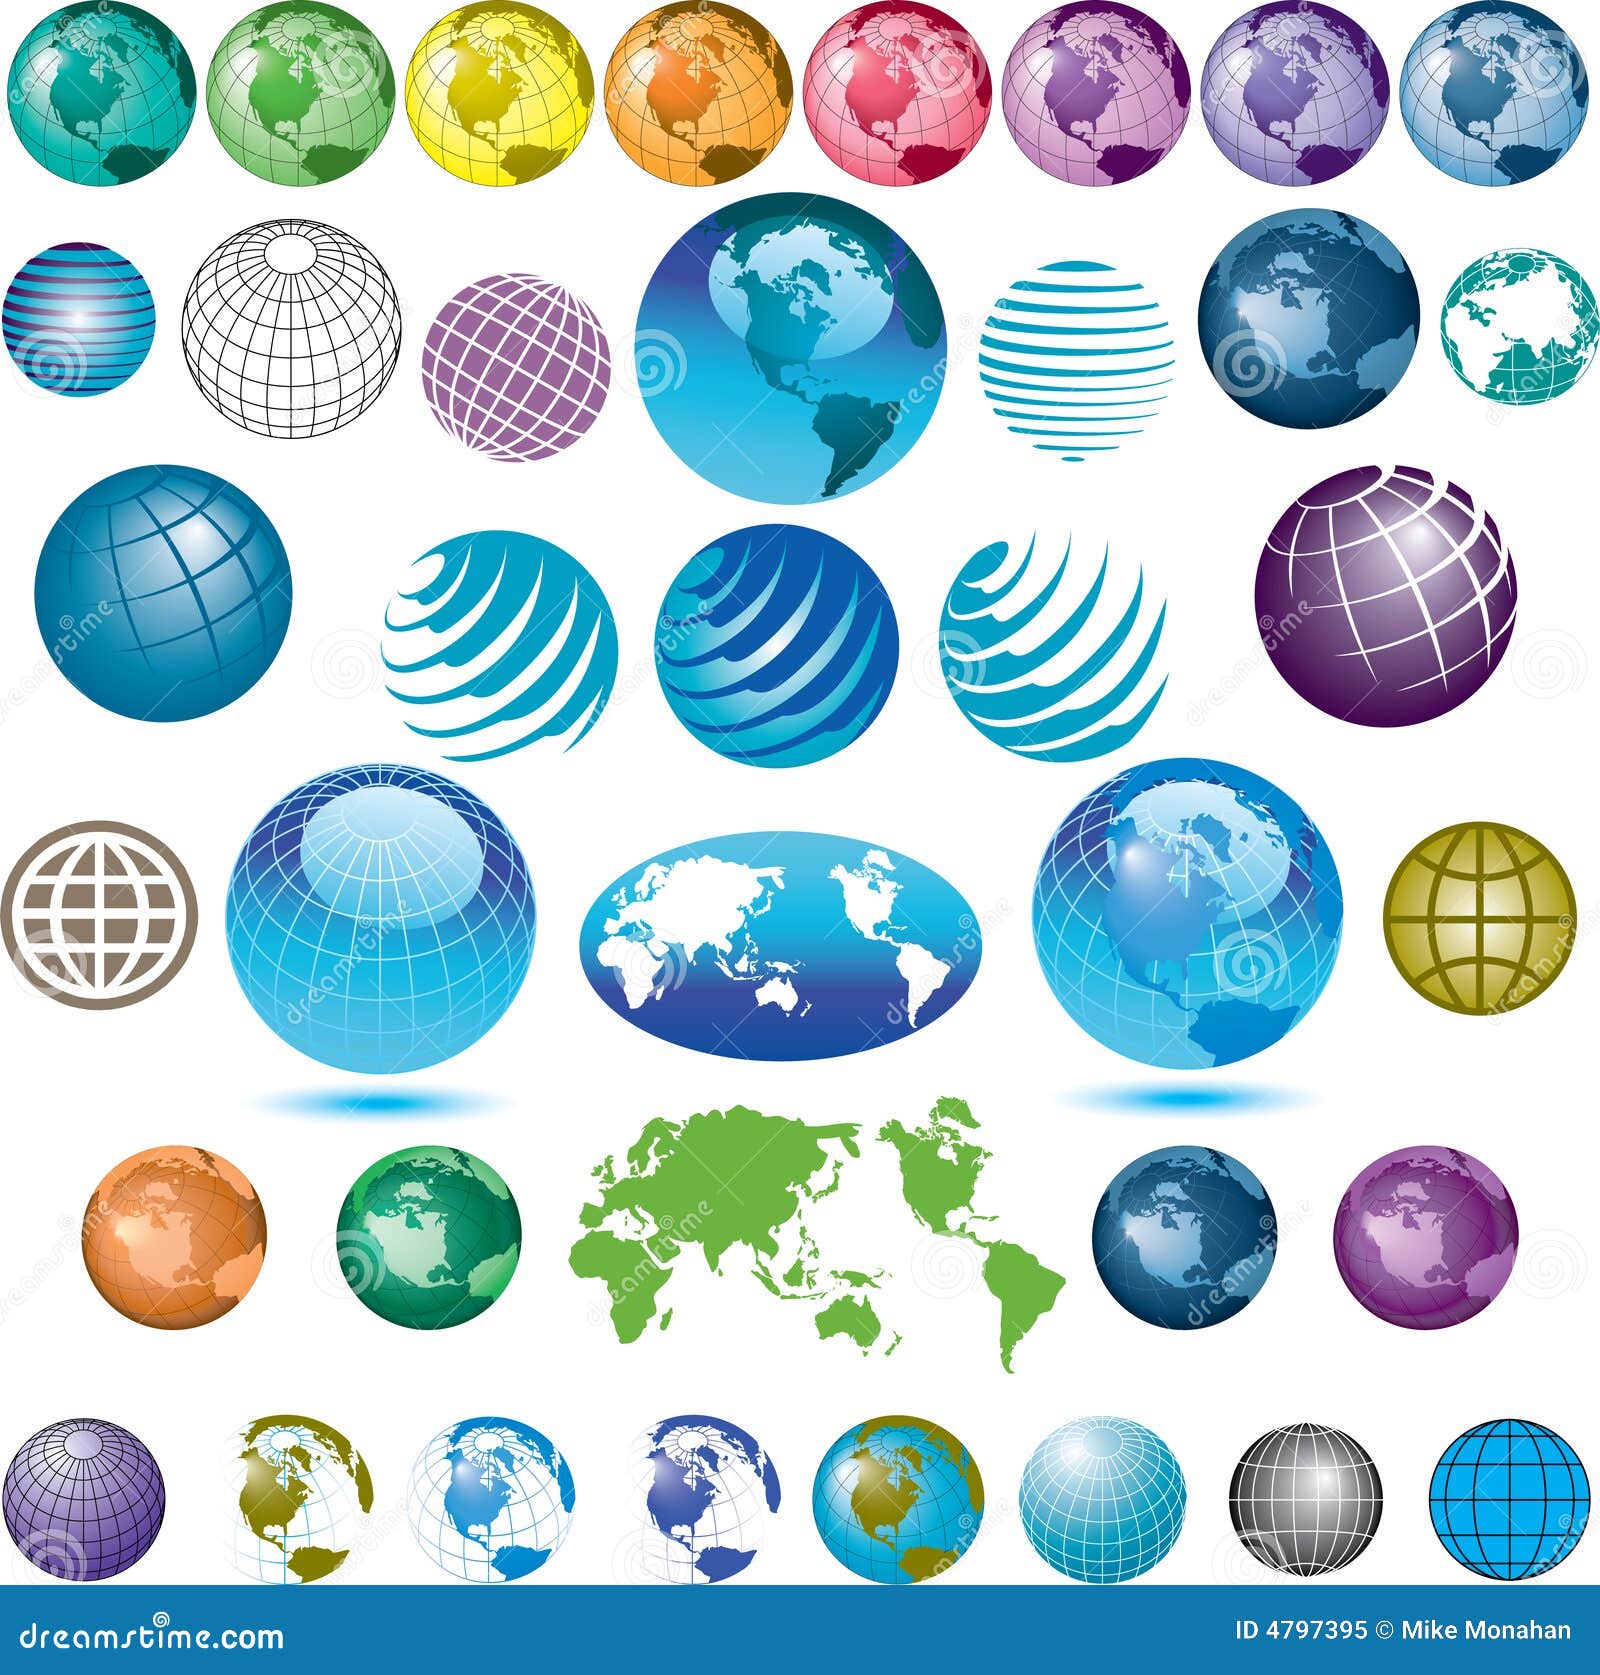 Assorted globe icons. An assortment of colourful globe icons.